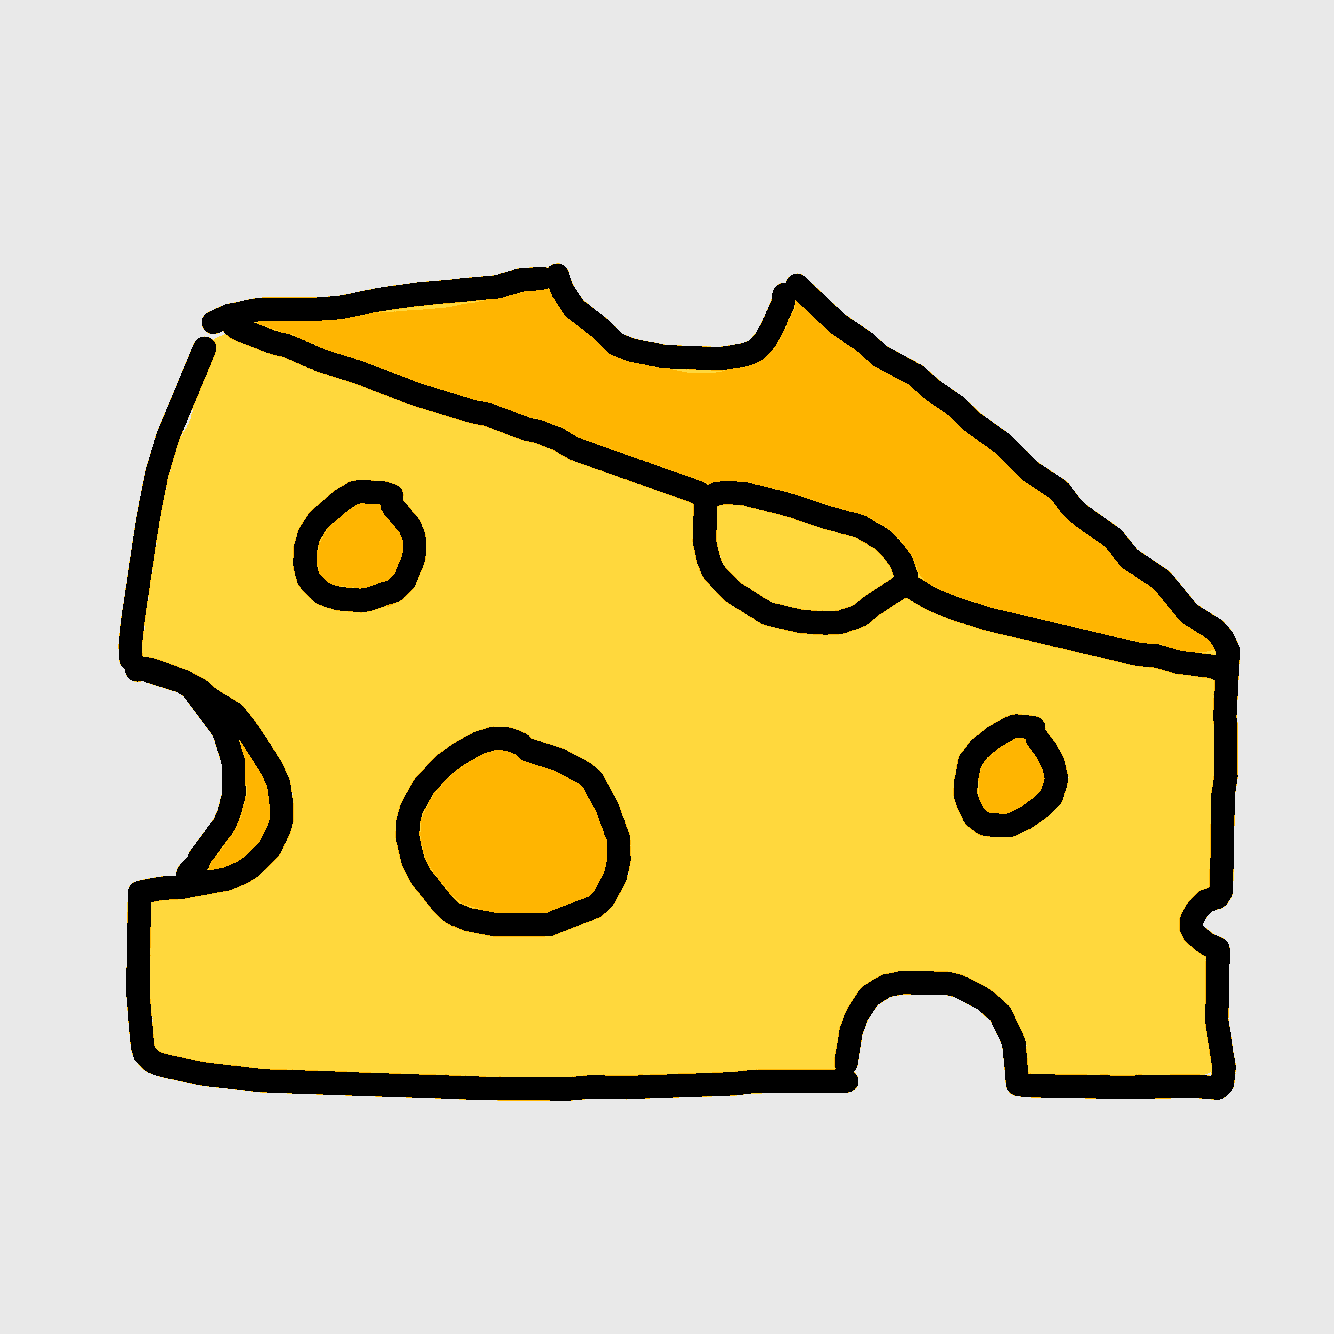 Thanks for the Big Cheese!